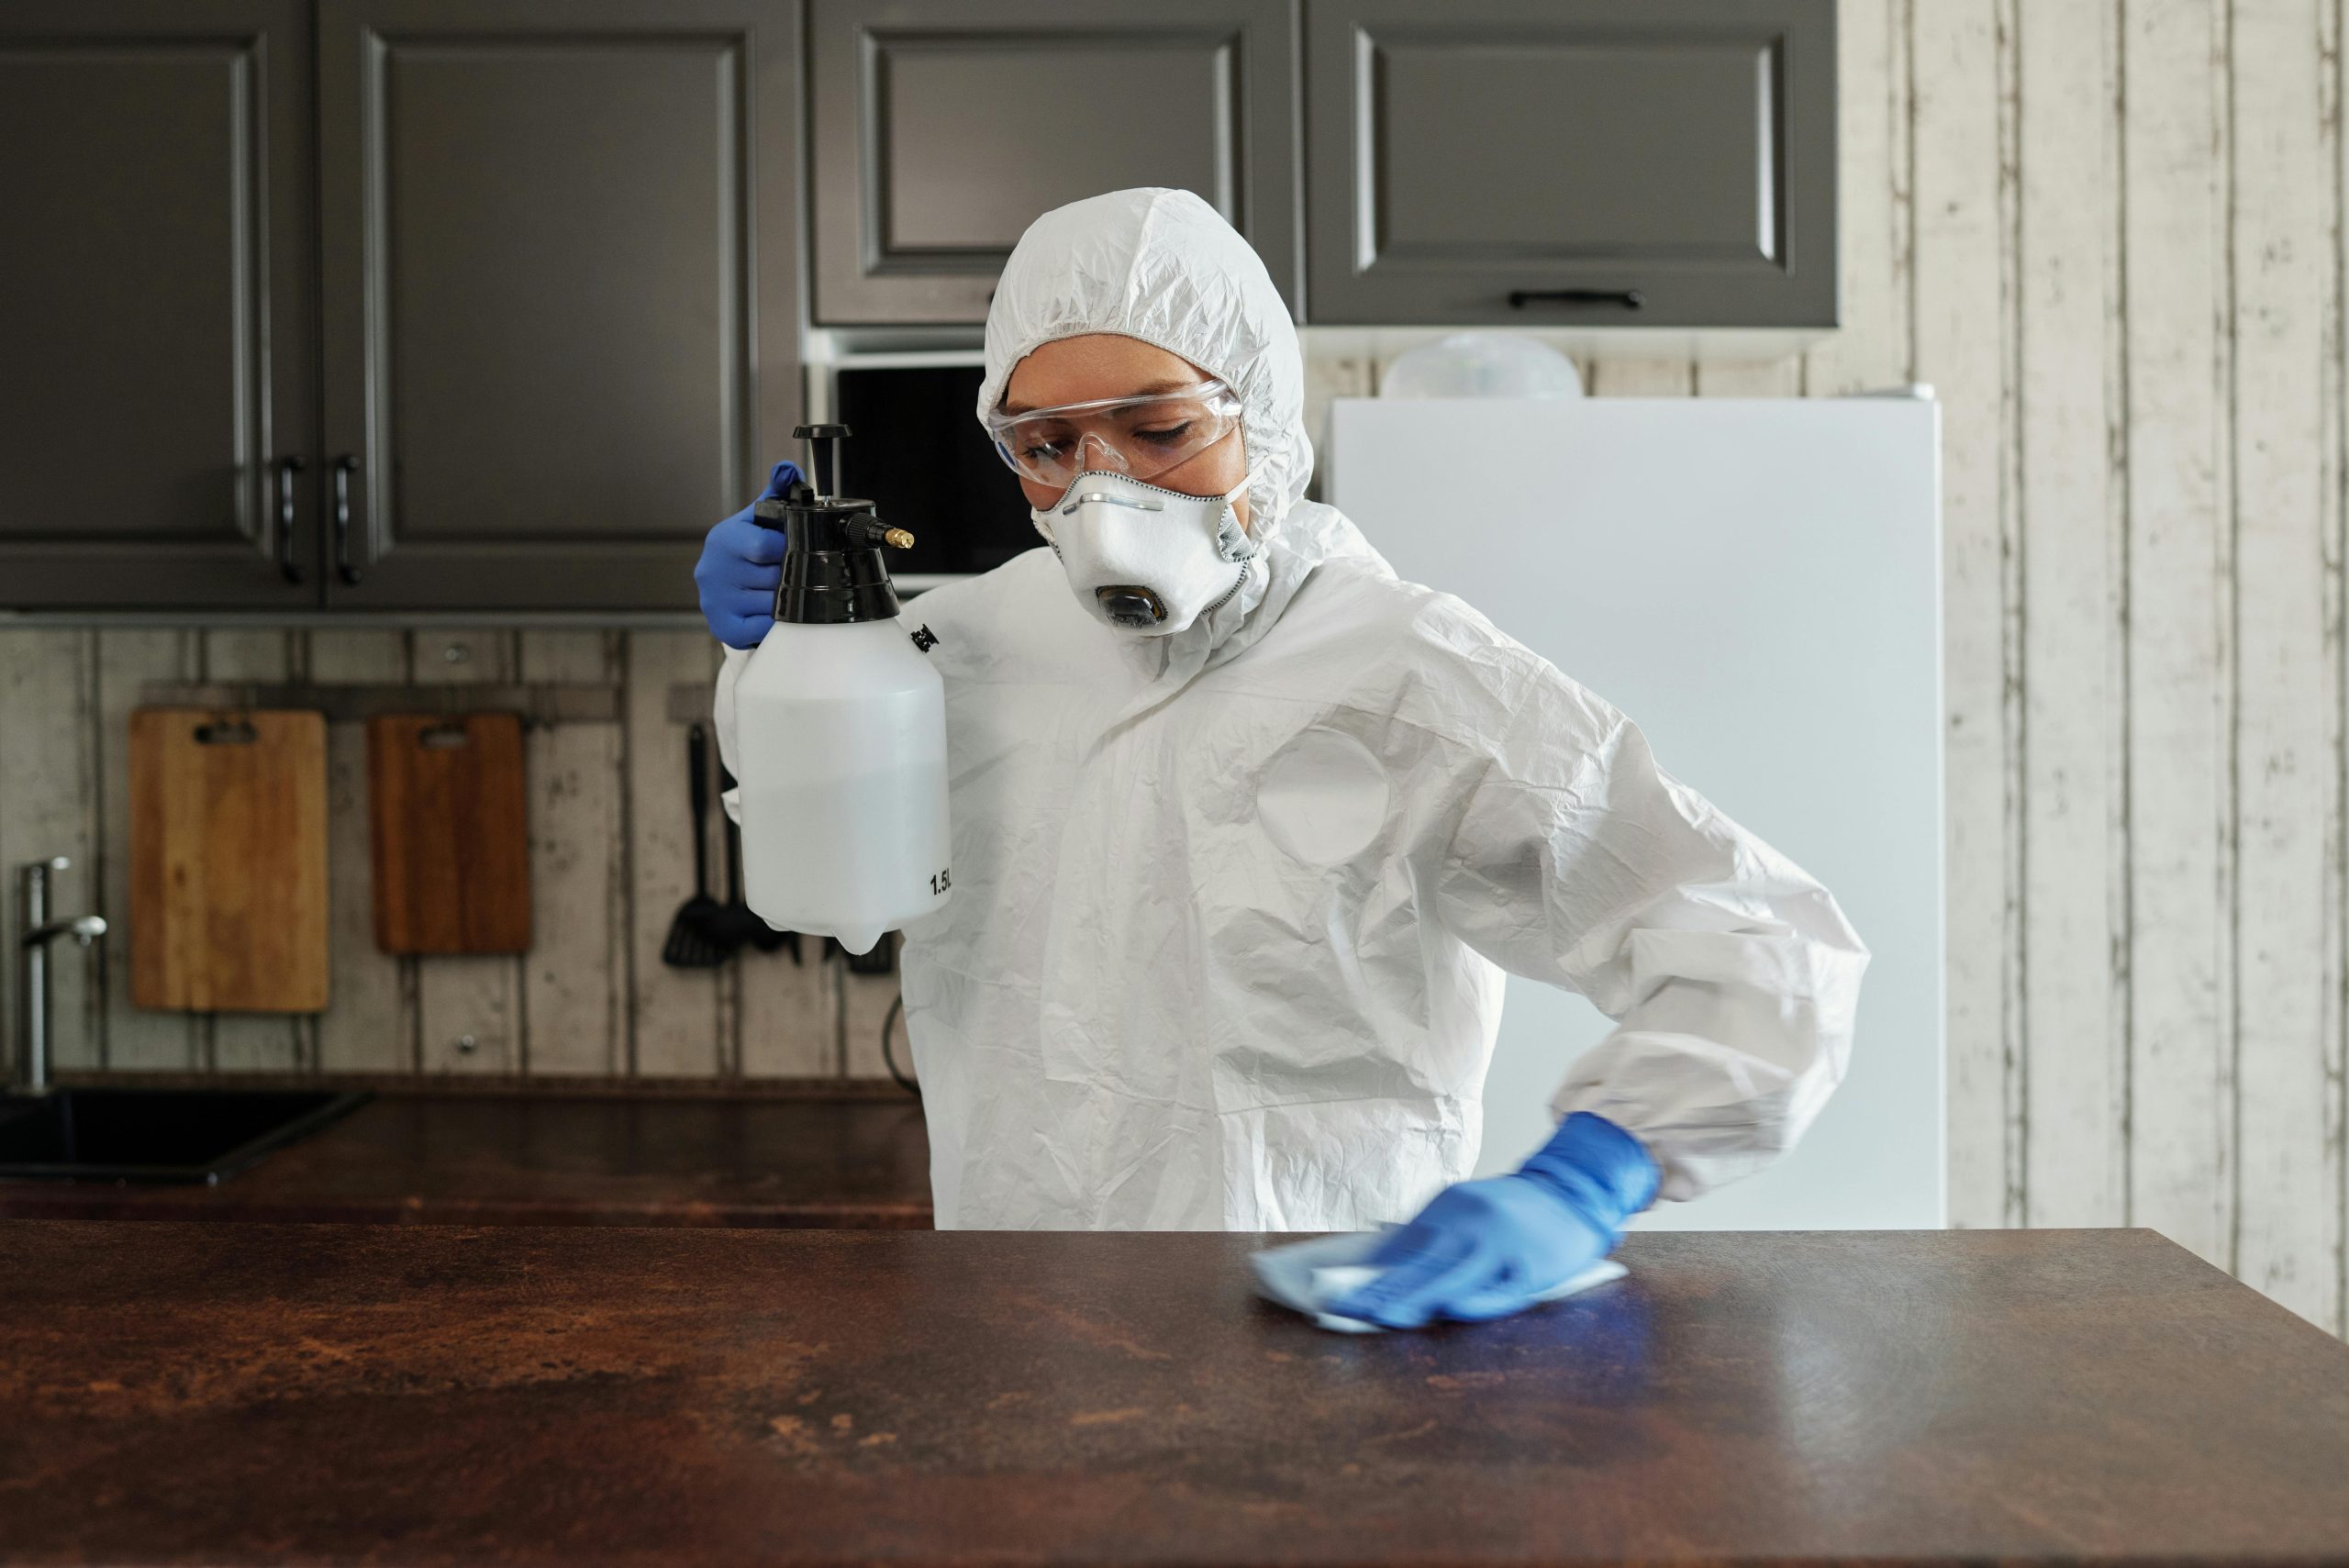 Woman wearing safety equipment, cleaning the kitchen table